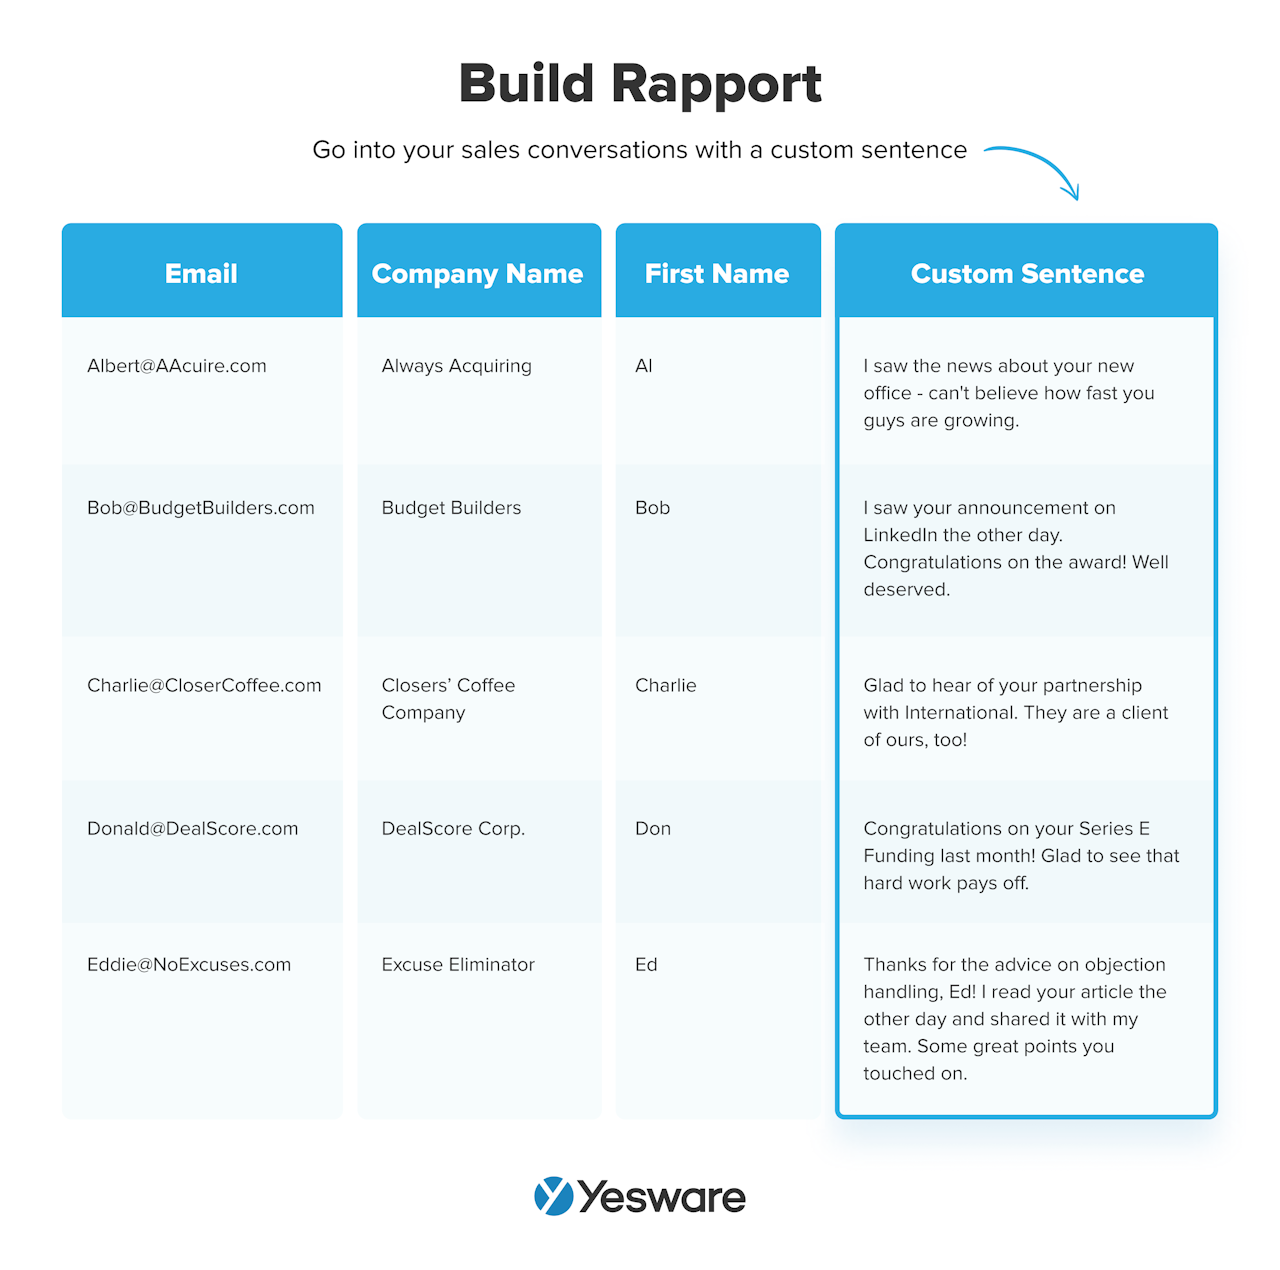 build rapport in sales prospecting emails with personalized statements